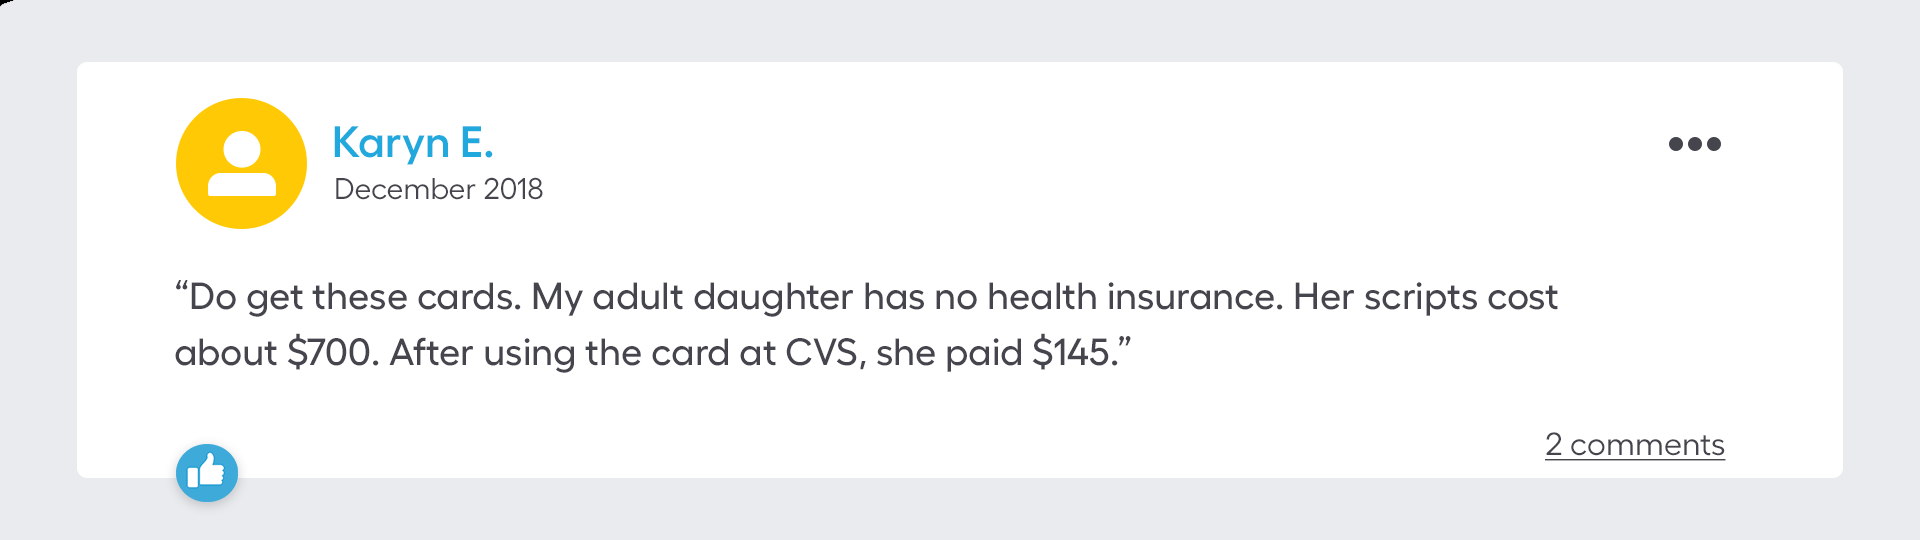 Do get these cards. My adult daughter has no health insurance. Her scripts cost about $700. After using the card at CVS, she paid $145